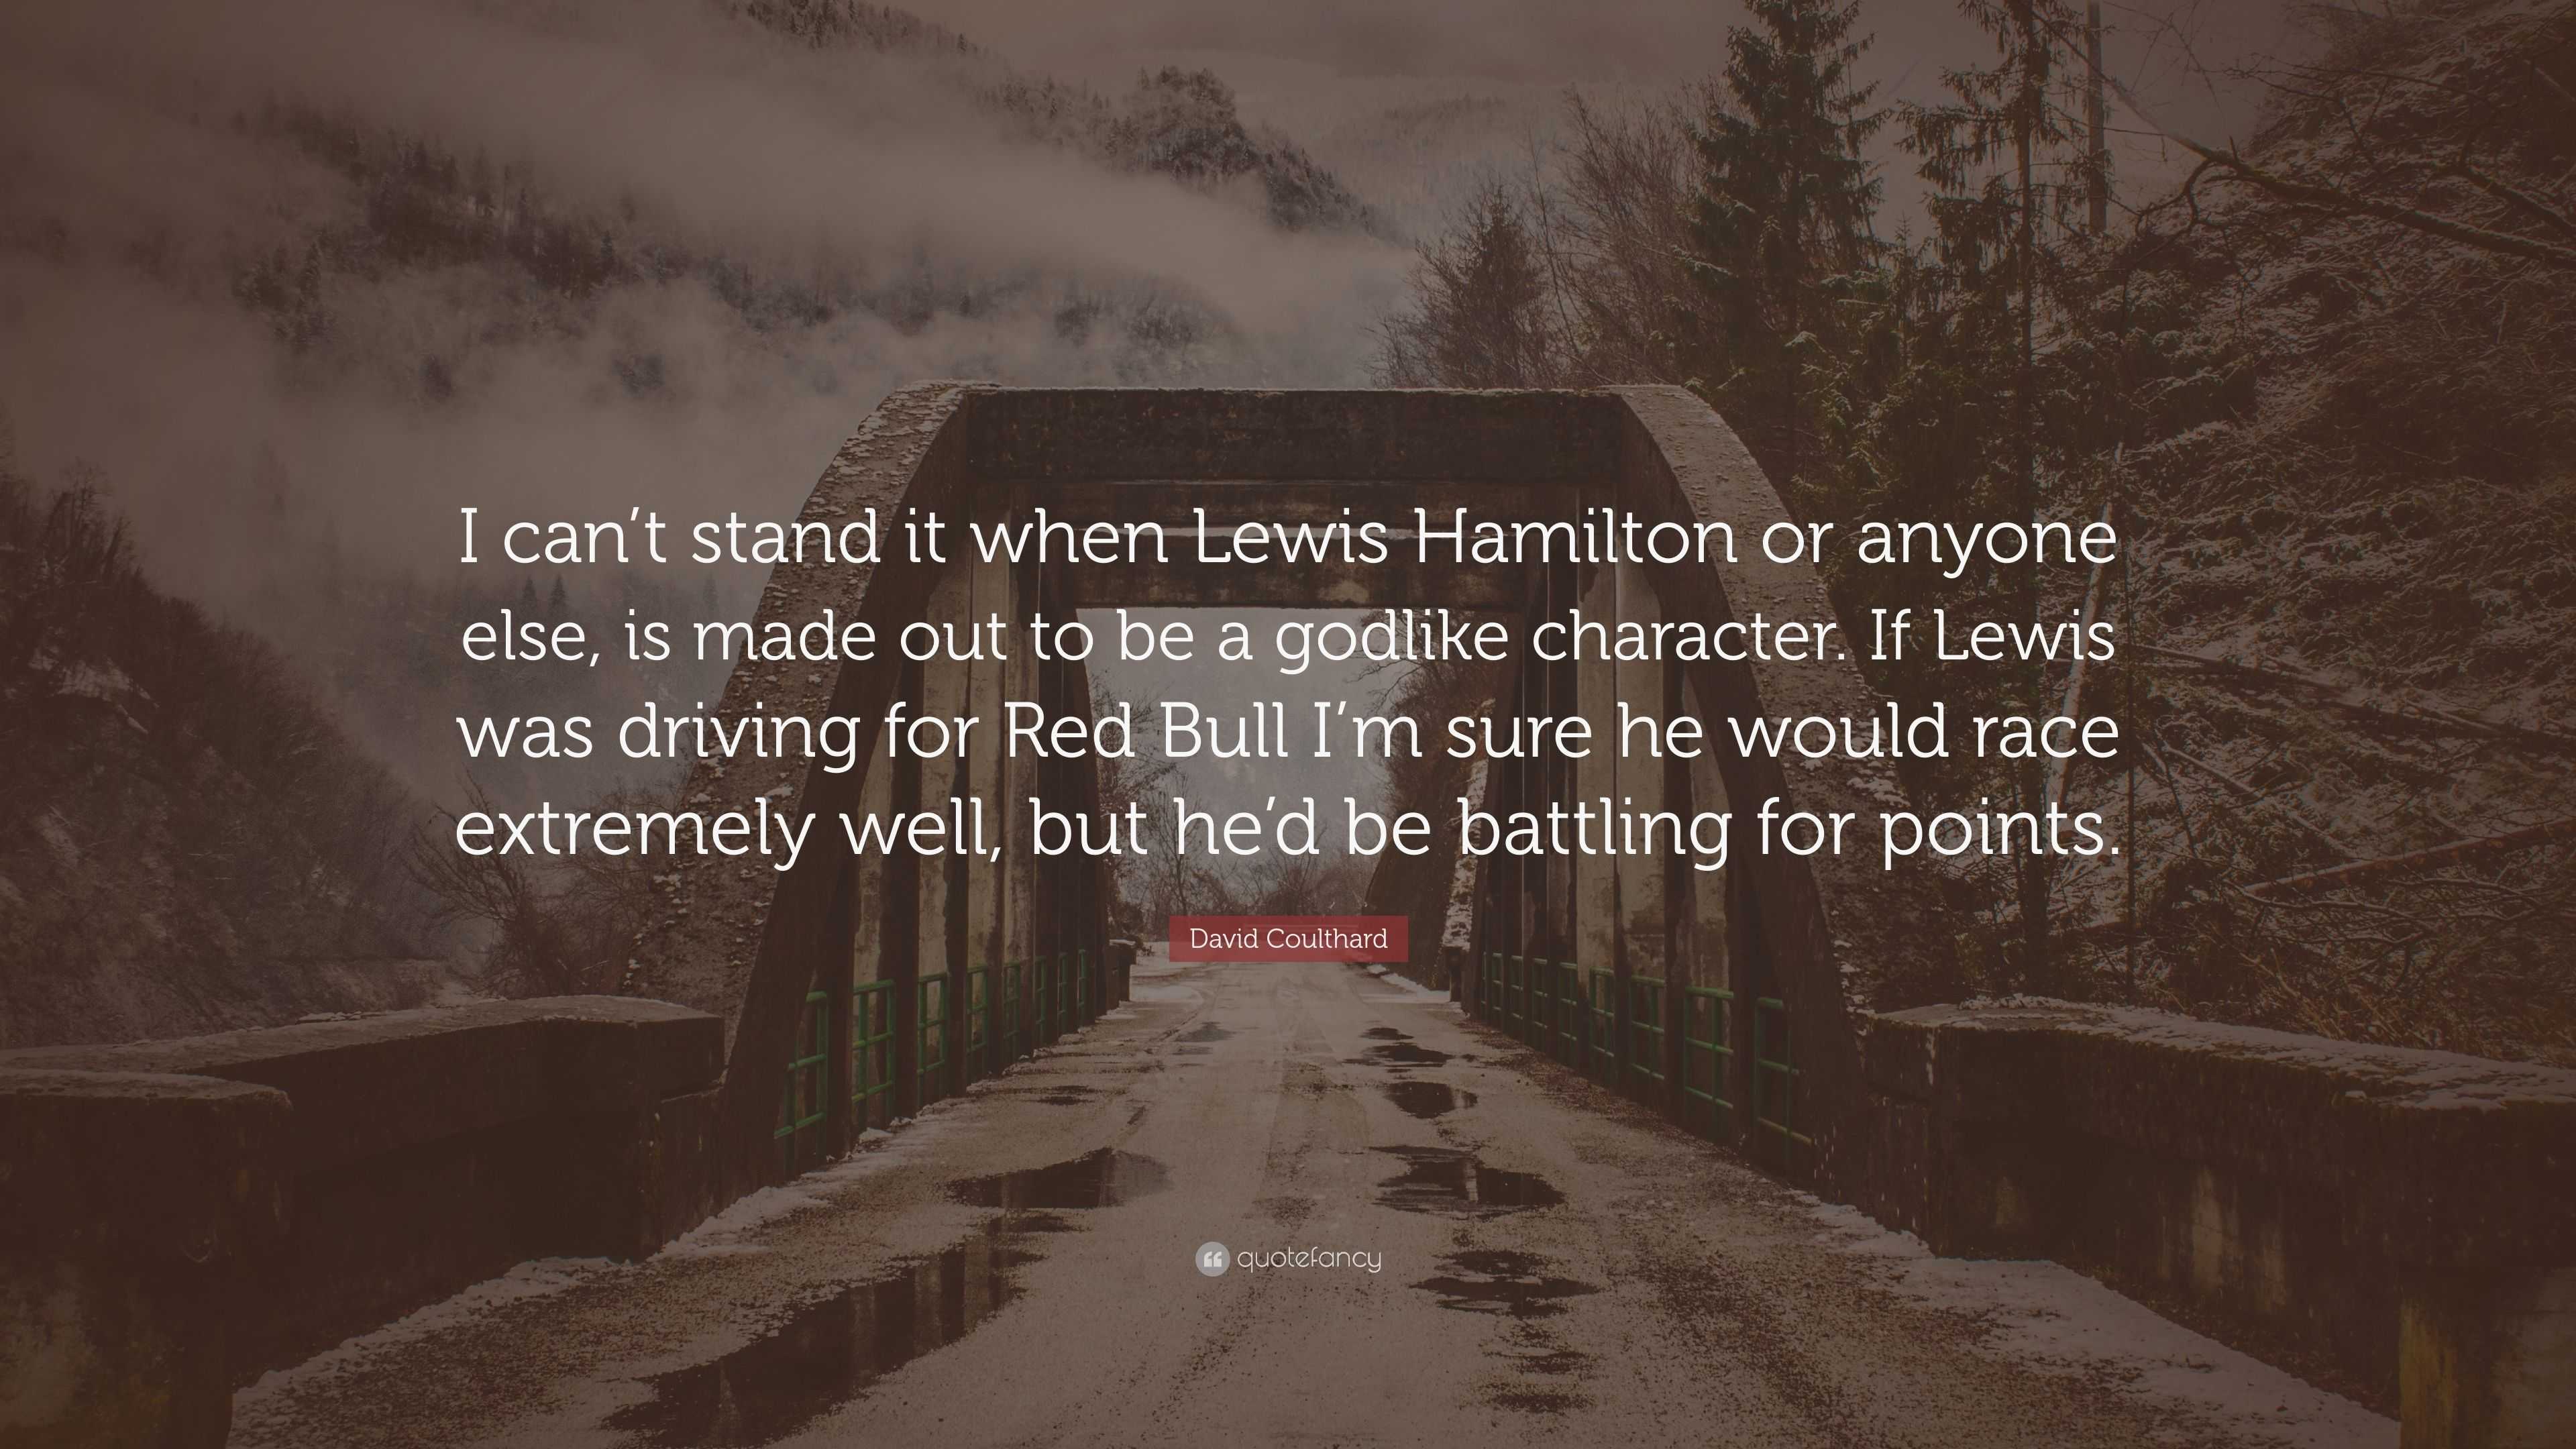 David Coulthard Quote I Can T Stand It When Lewis Hamilton Or Anyone Else Is Made Out To Be A Godlike Character If Lewis Was Driving For Red